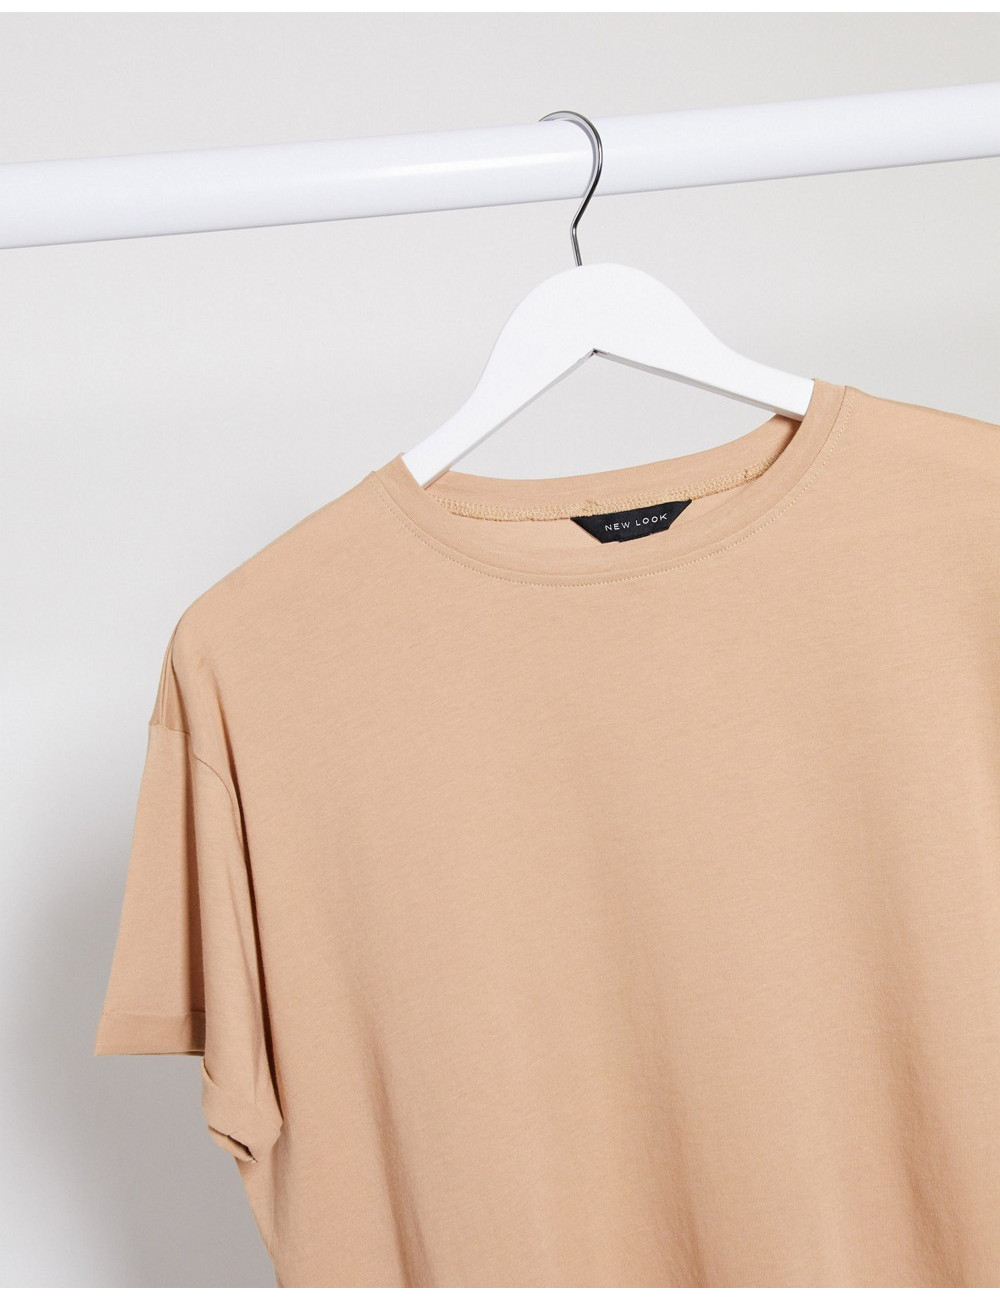 New Look boxy tee in camel